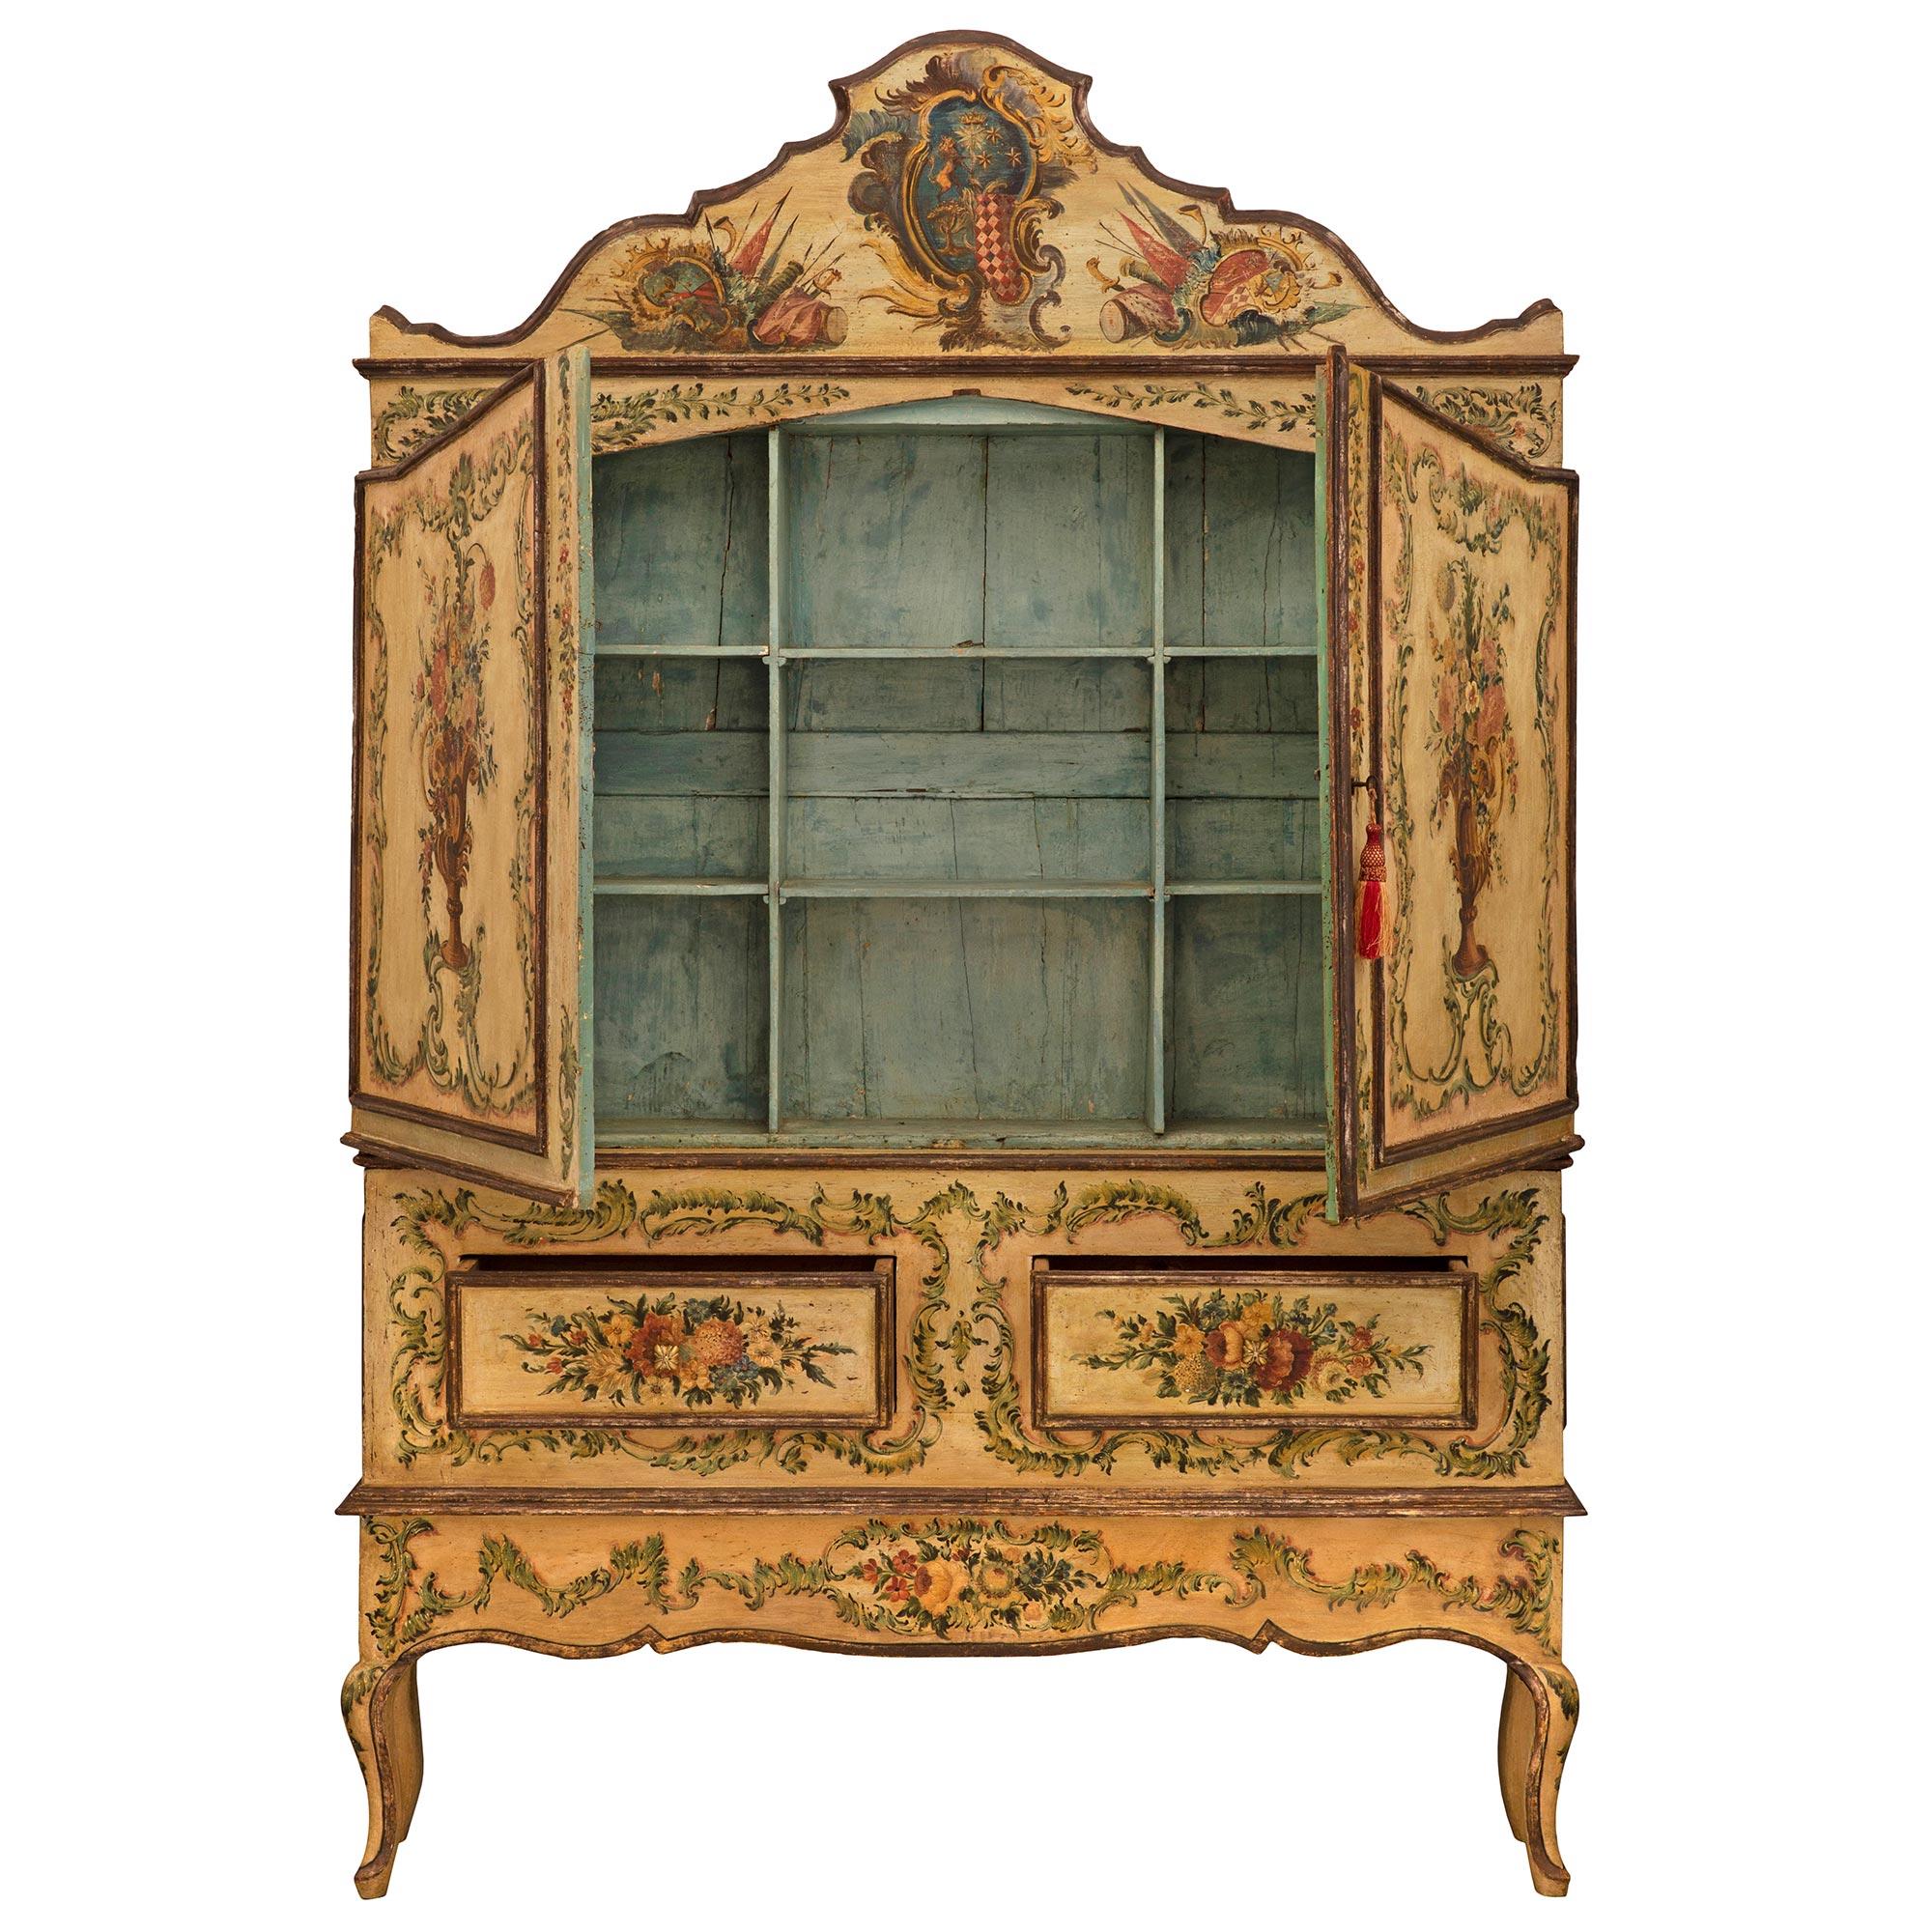 A stunning and extremely decorative Italian 18th century Venetian st. hand painted cabinet. The most unique two door two drawer cabinet is raised by elegant cabriole legs and displays exceptional wonderfully executed colorful hand painted blooming